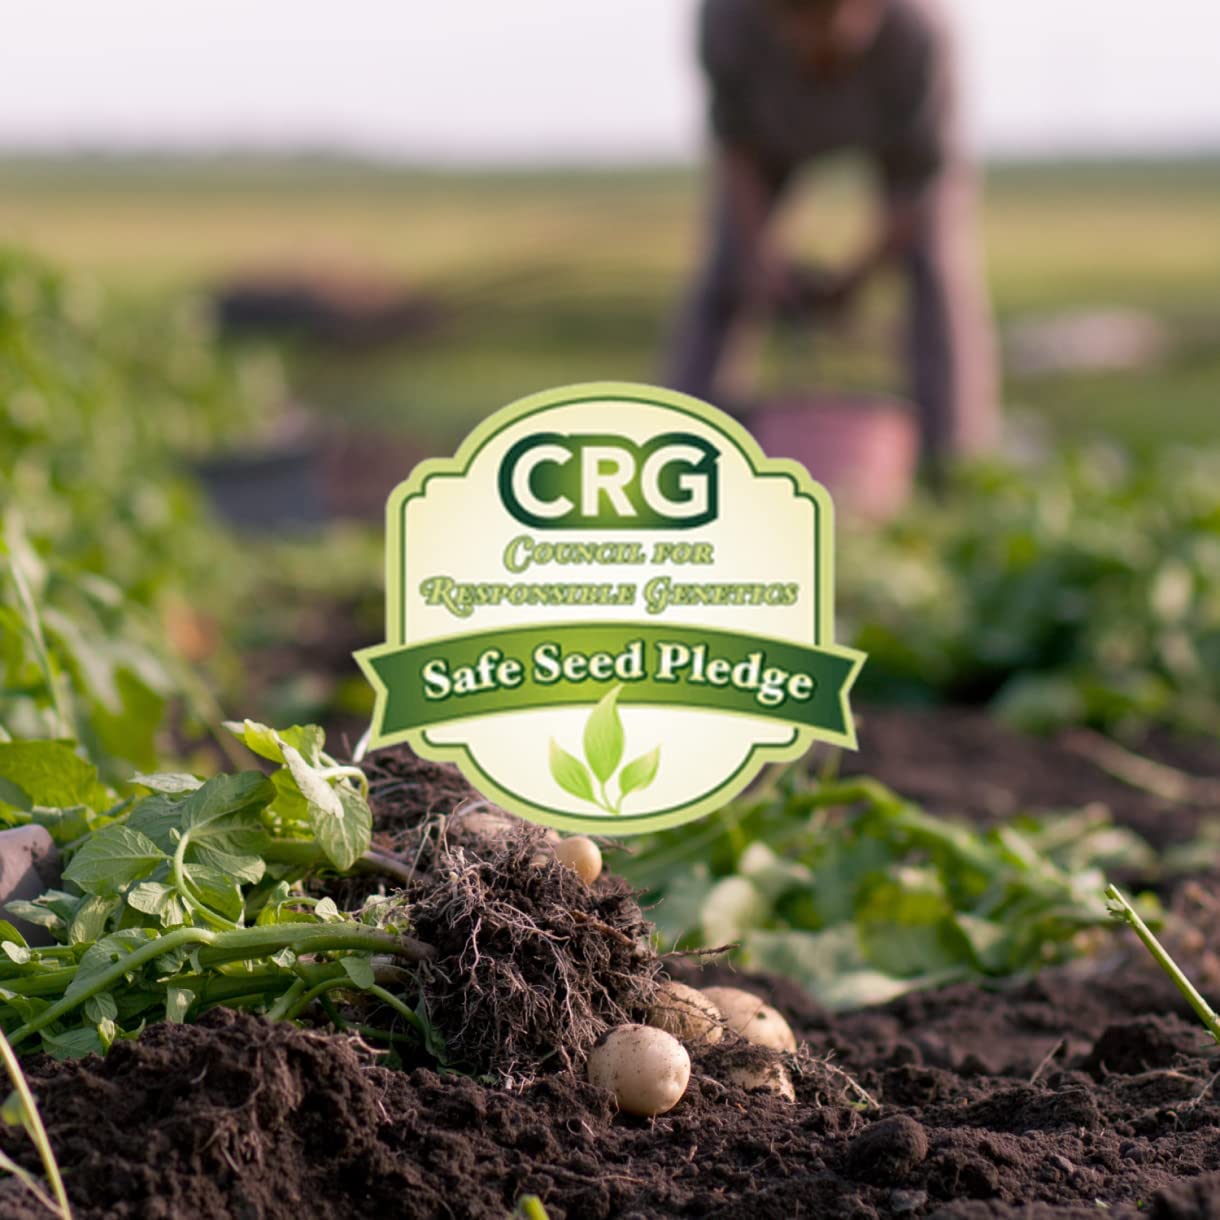 Image showcasing the CRG Safe Seed Pledge logo, symbolizing a commitment to ethical and sustainable seed practices 